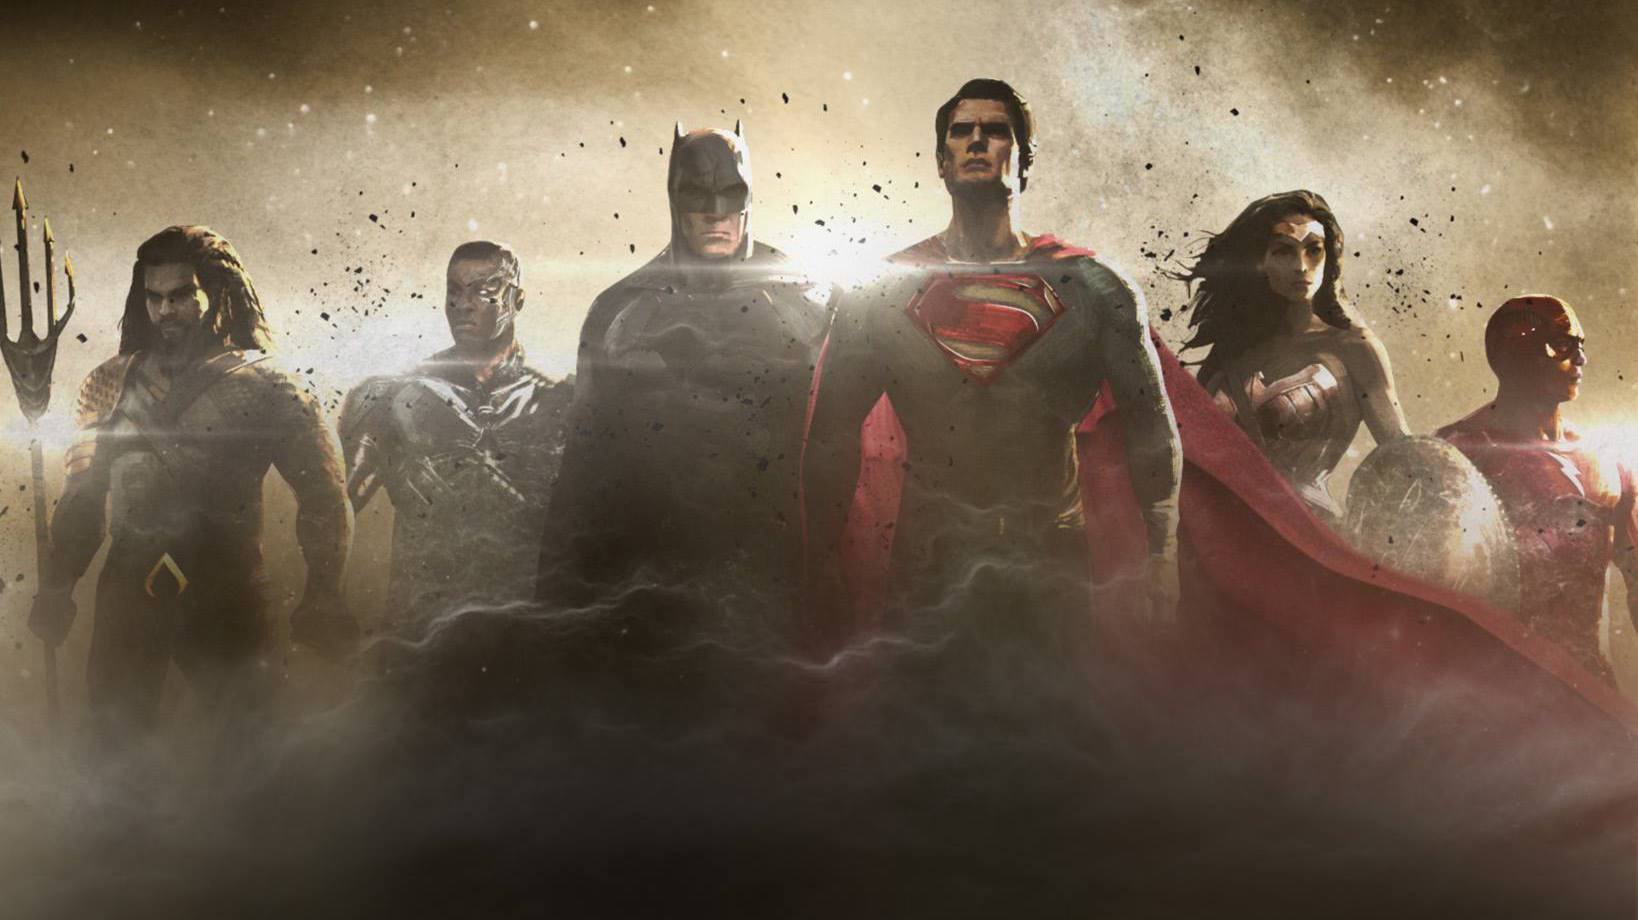 Zack Snyder Teases Behind the Scenes of ‘Justice League’ Film